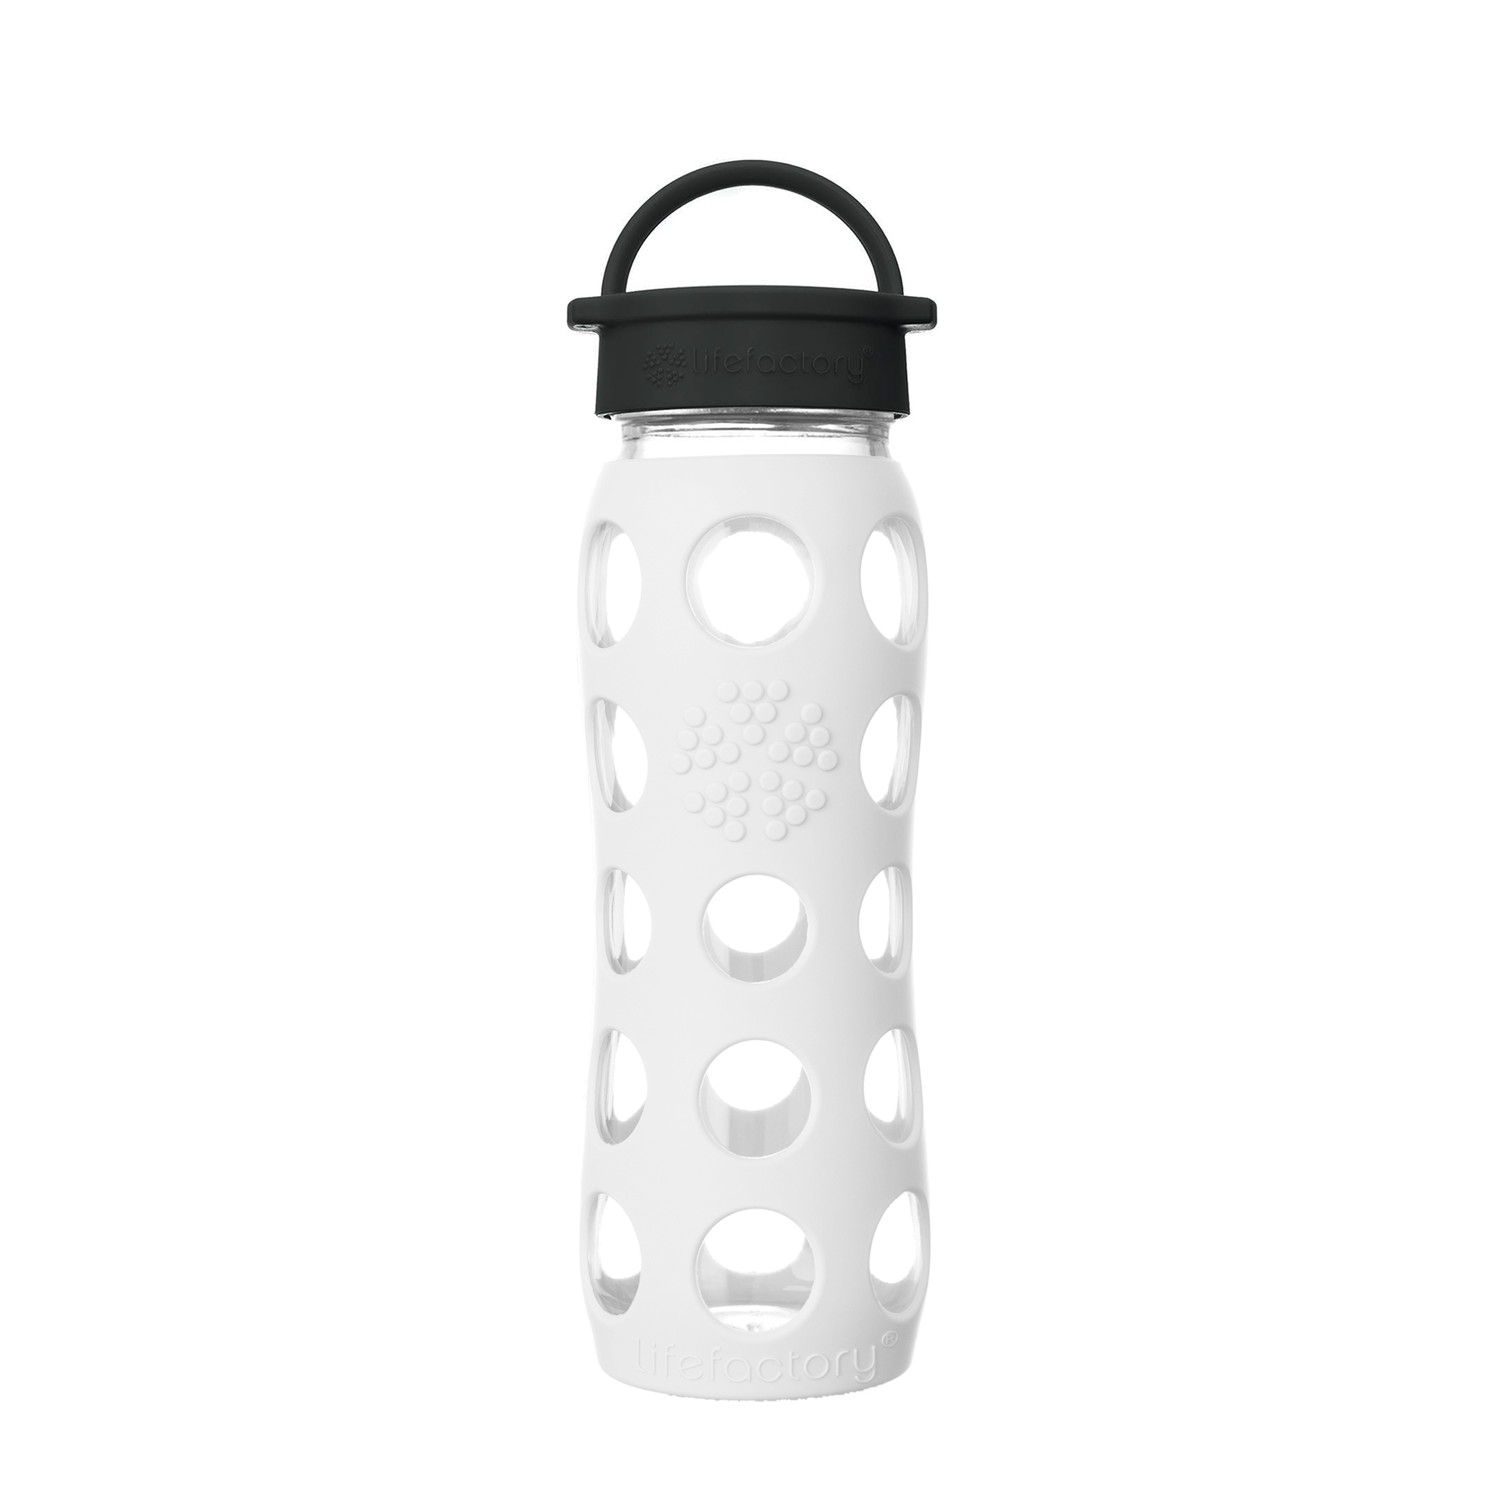 Lifefactory Glasflasche - 650ml